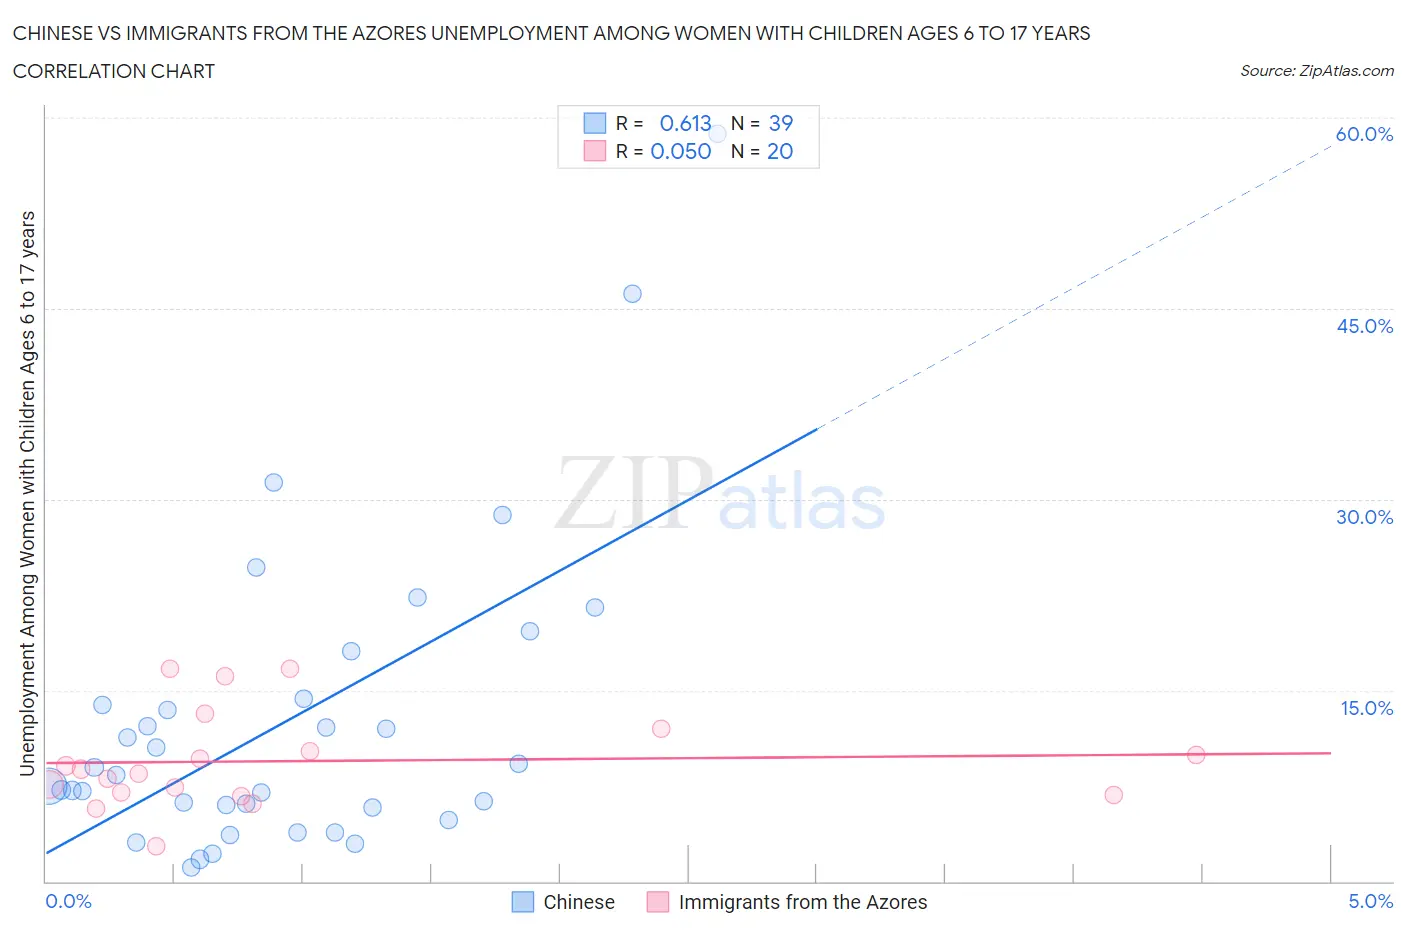 Chinese vs Immigrants from the Azores Unemployment Among Women with Children Ages 6 to 17 years